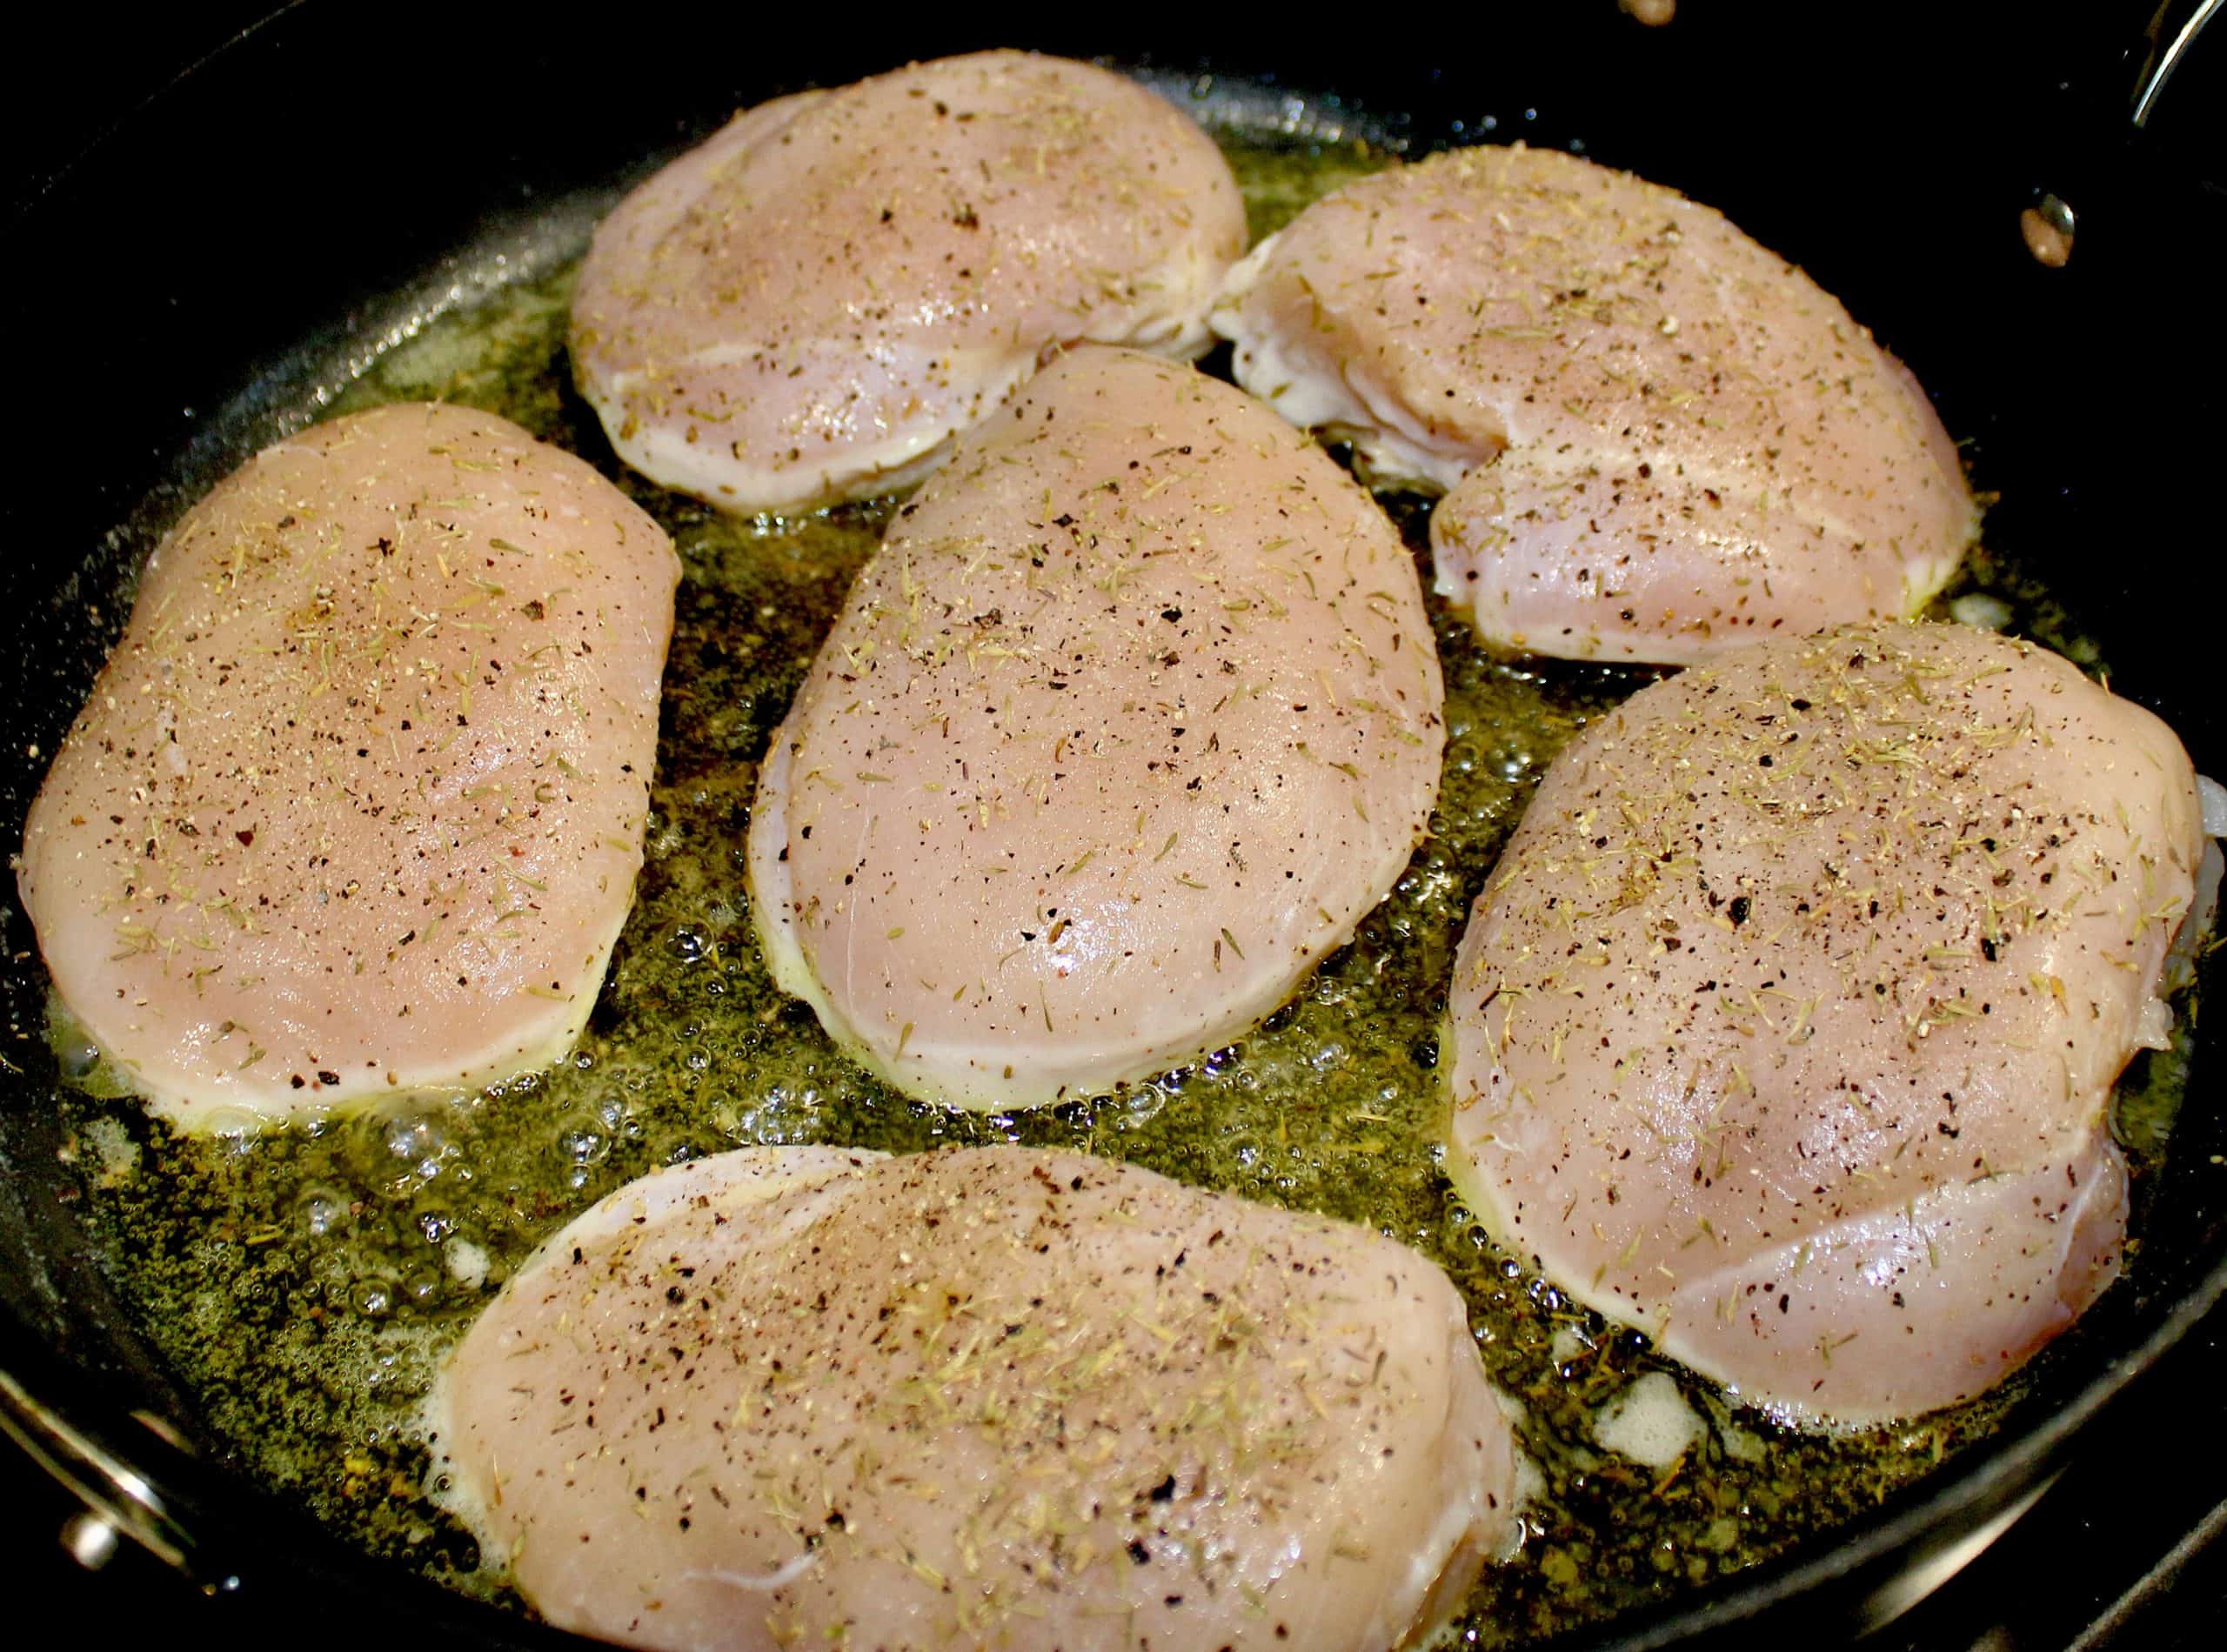 6 pieces of chicken with spices cooking in skillet